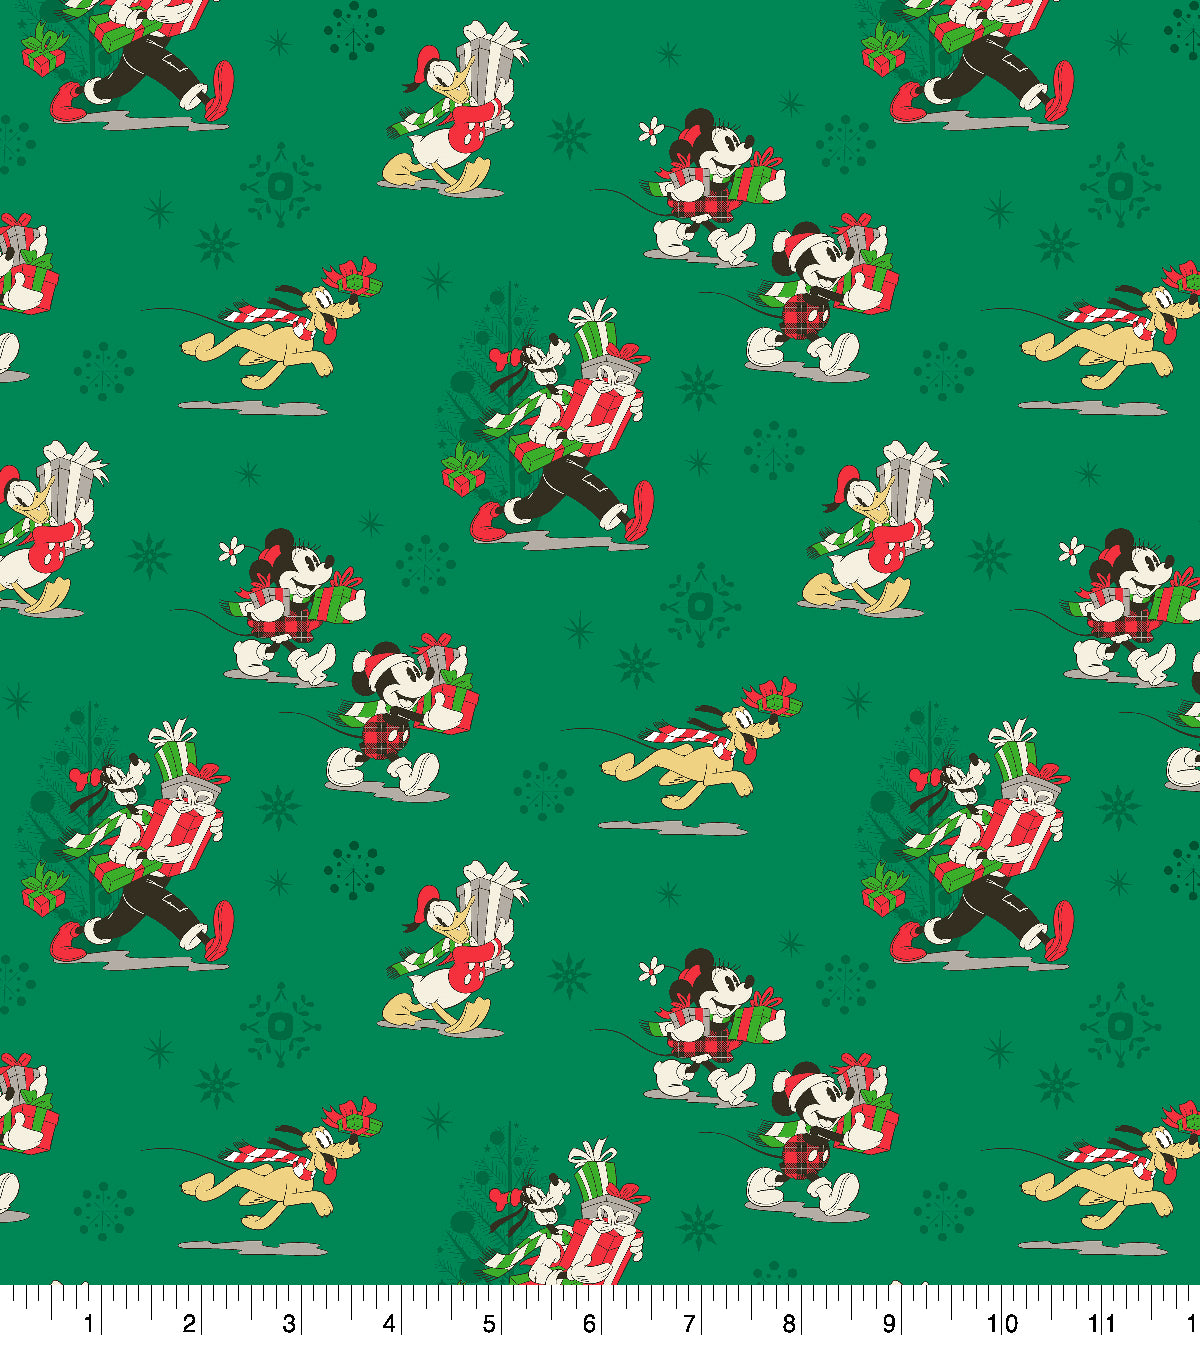 Disney Mickey Mouse & Friends Vintage Christmas Fabric